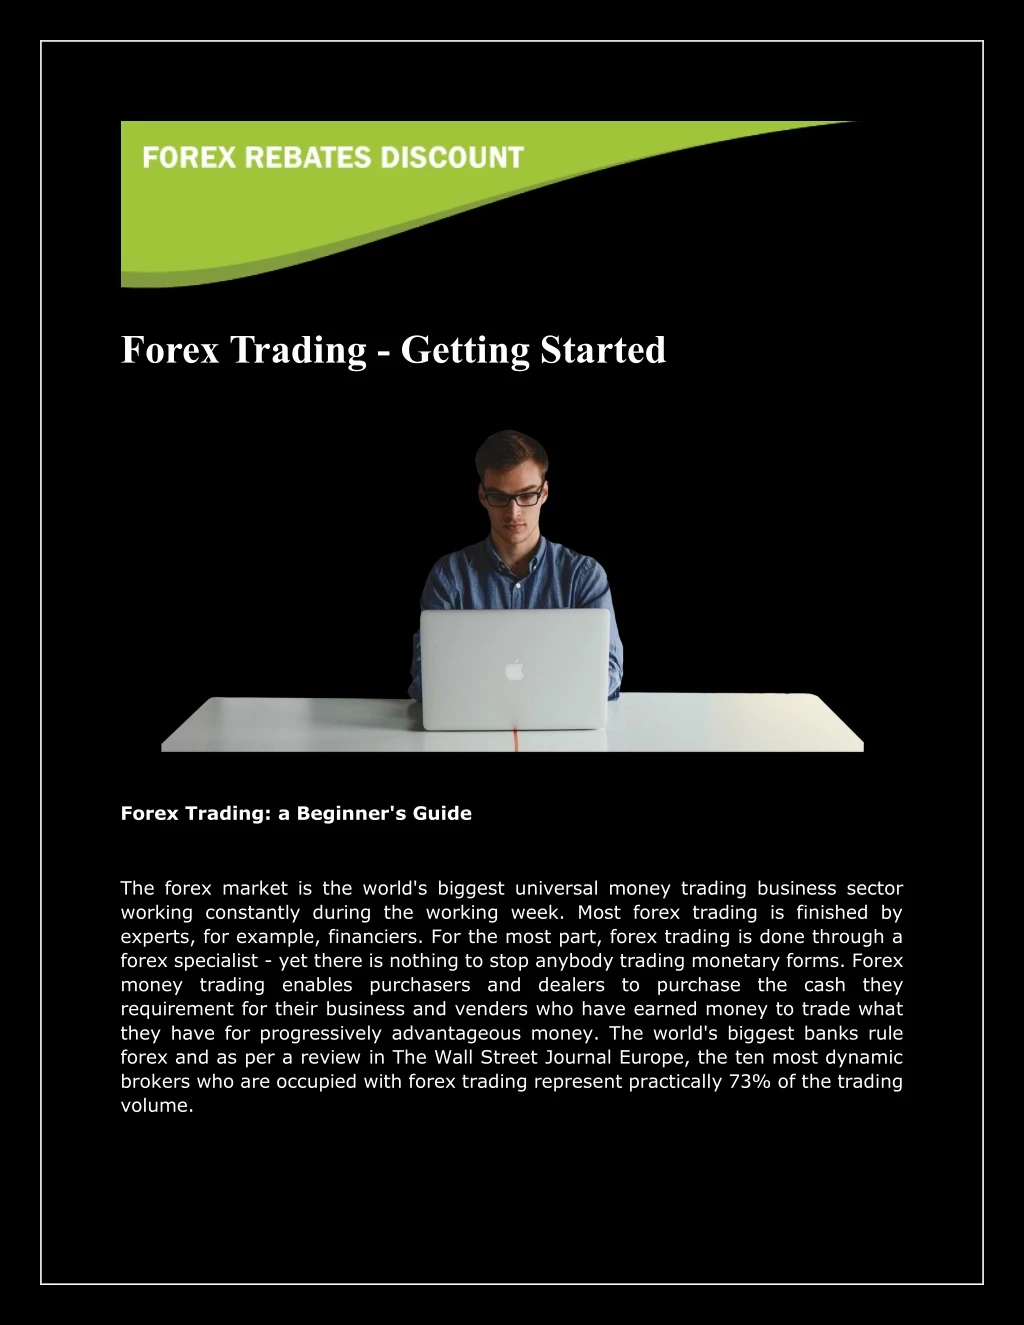 forex trading getting started